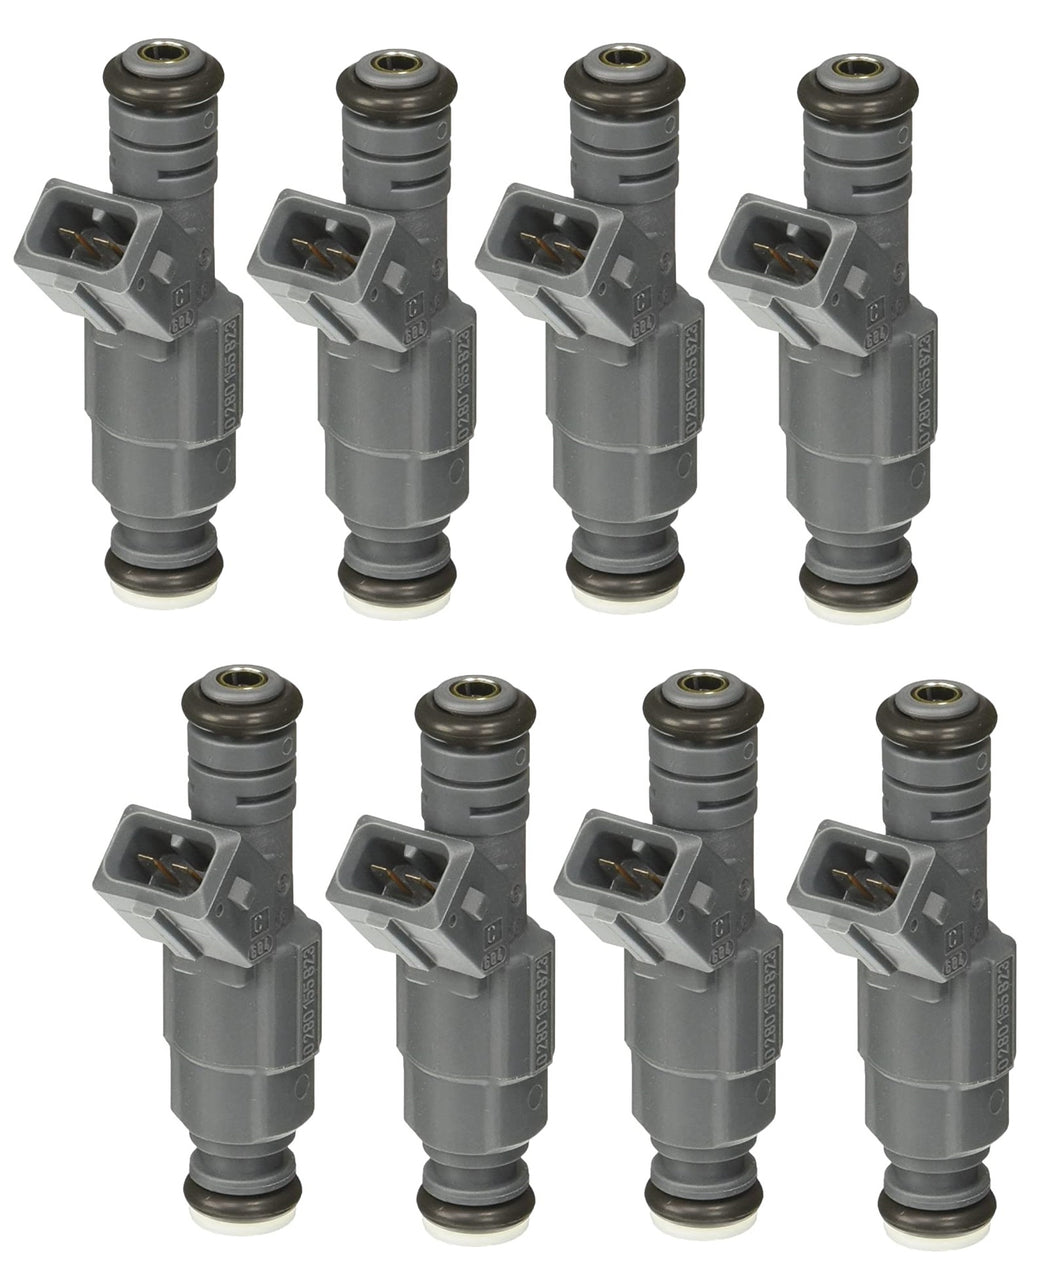 8 x fuel injectors for Land Rover Range Rover 4.4 2002 - 2005 V8 M62